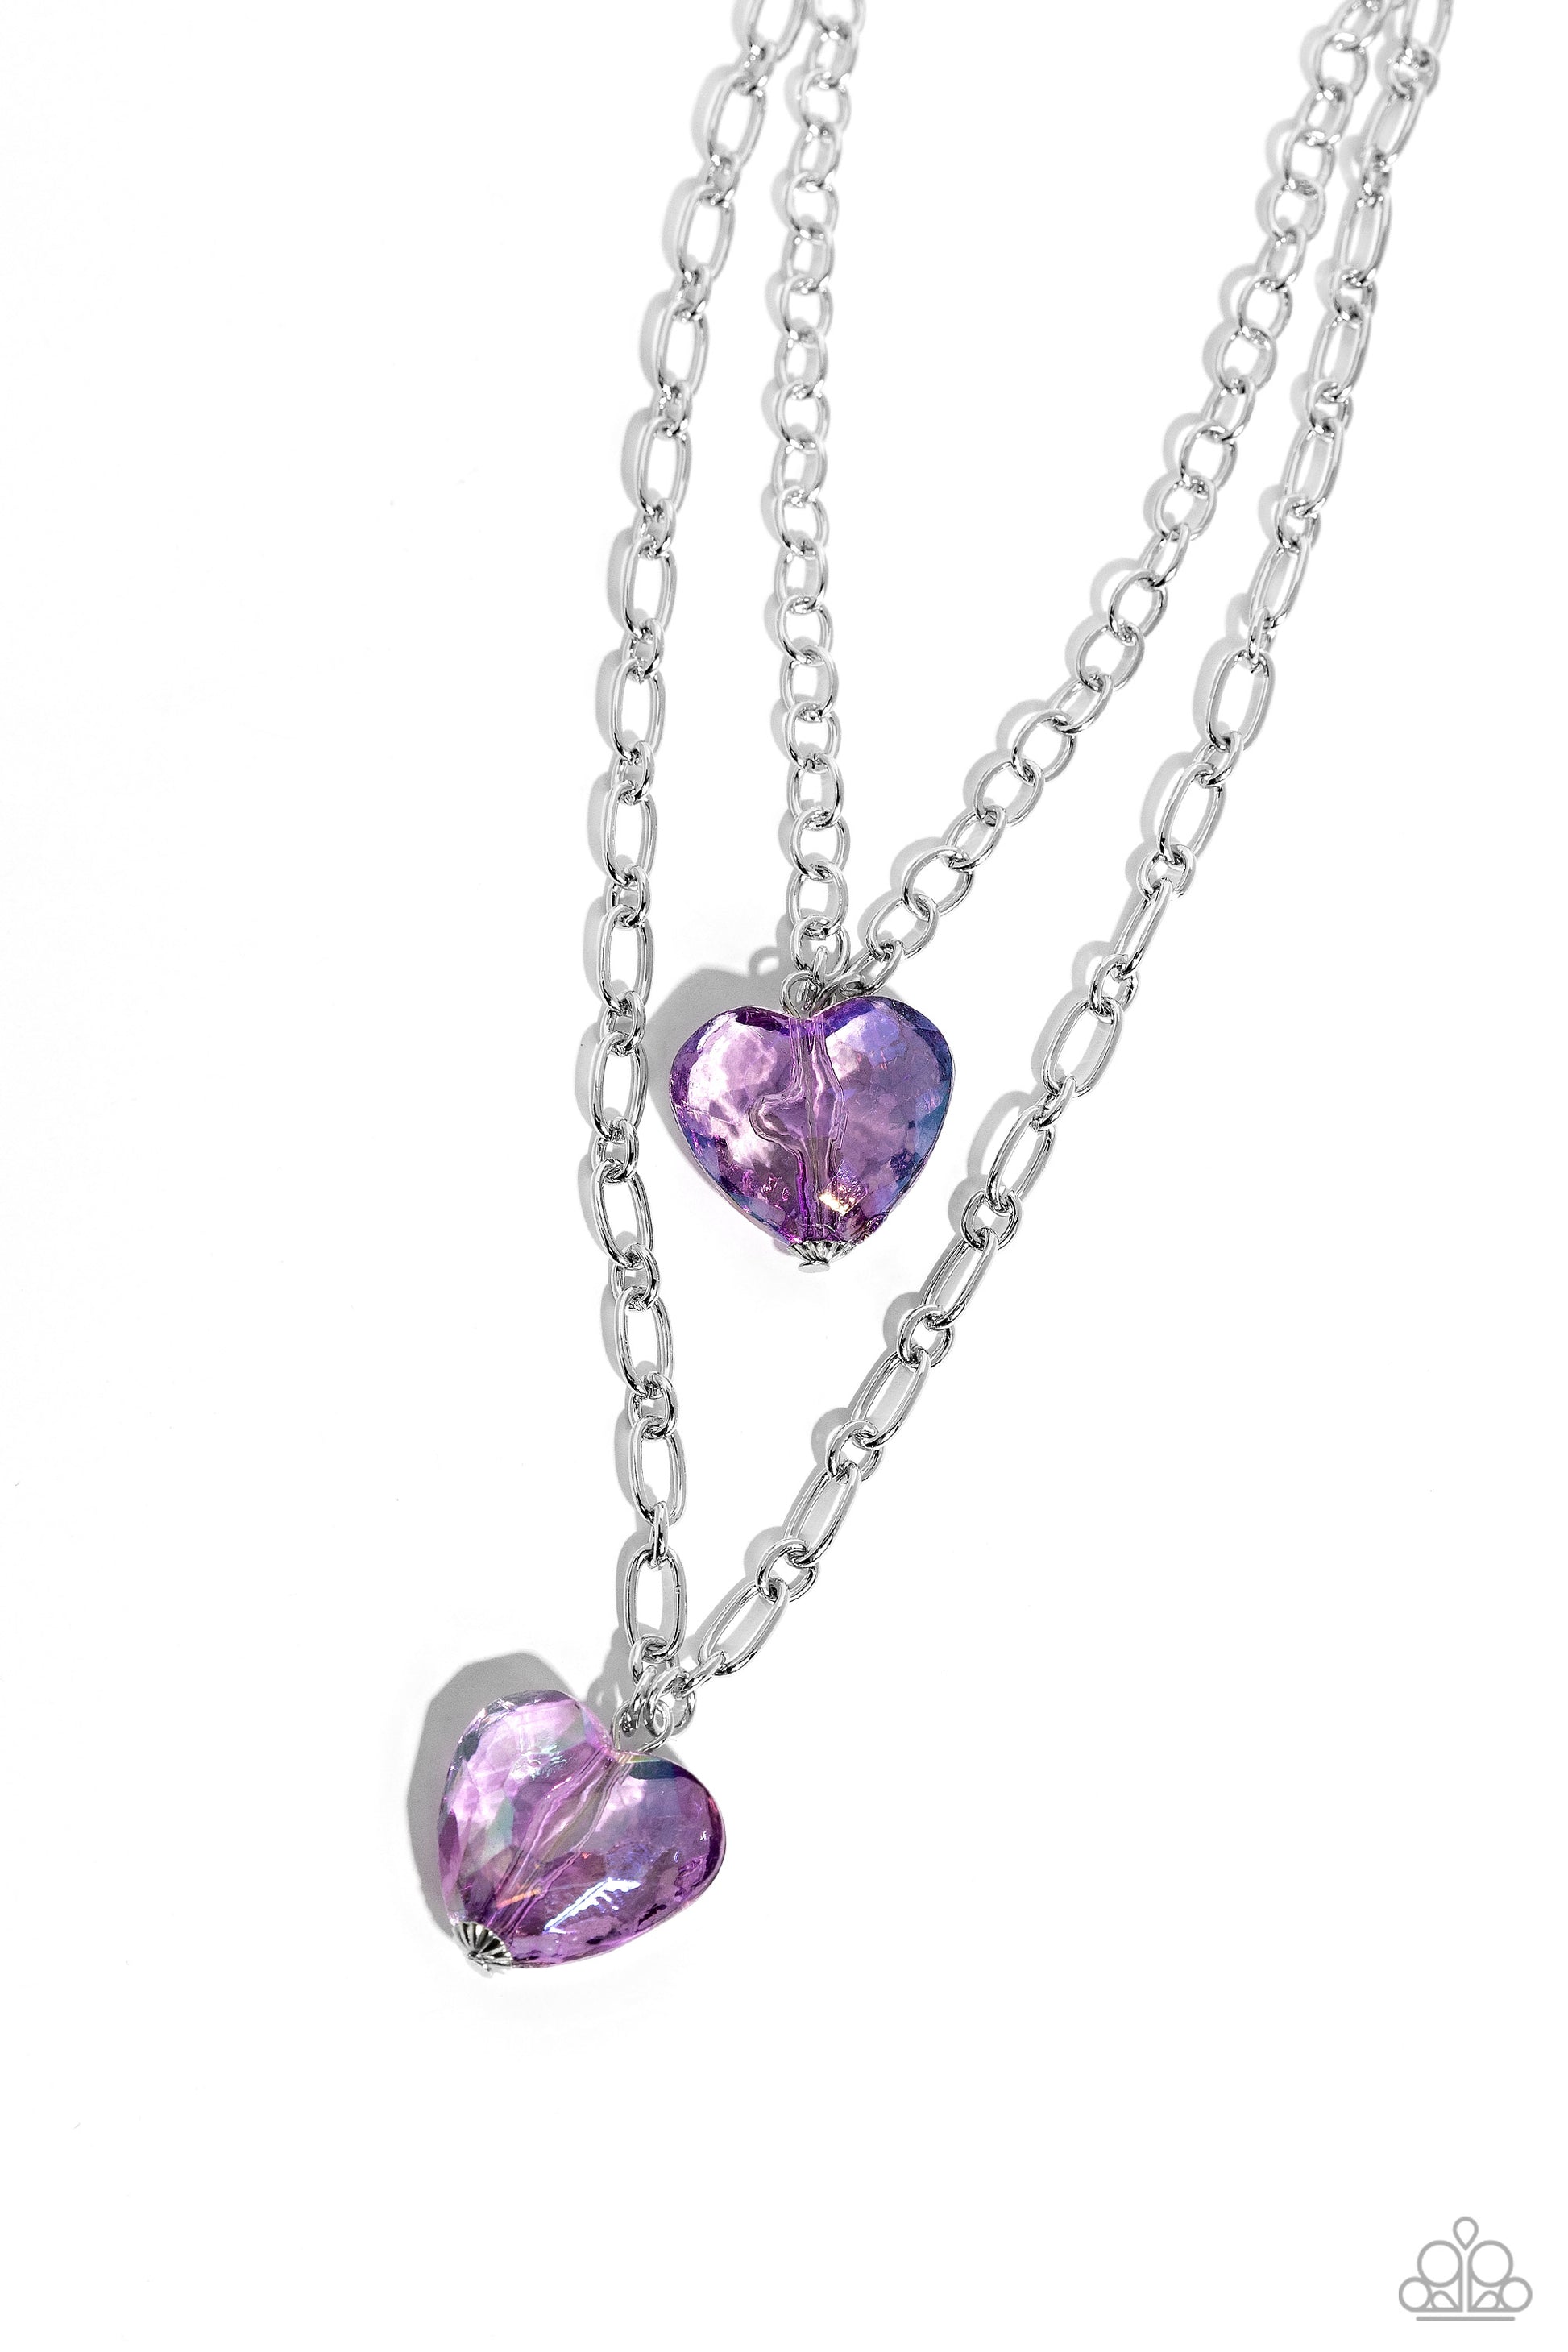 Layered Love Purple Heart Necklace - Paparazzi Accessories  Featuring a subtle iridescent shimmer, two glassy purple gem hearts are delicately suspended above one another on a paperclip and silver oval link chain for a whimsical double-stacked display. Features an adjustable clasp closure.  Sold as one individual necklace. Includes one pair of matching earrings.  SKU: P2WH-PRXX-446XX